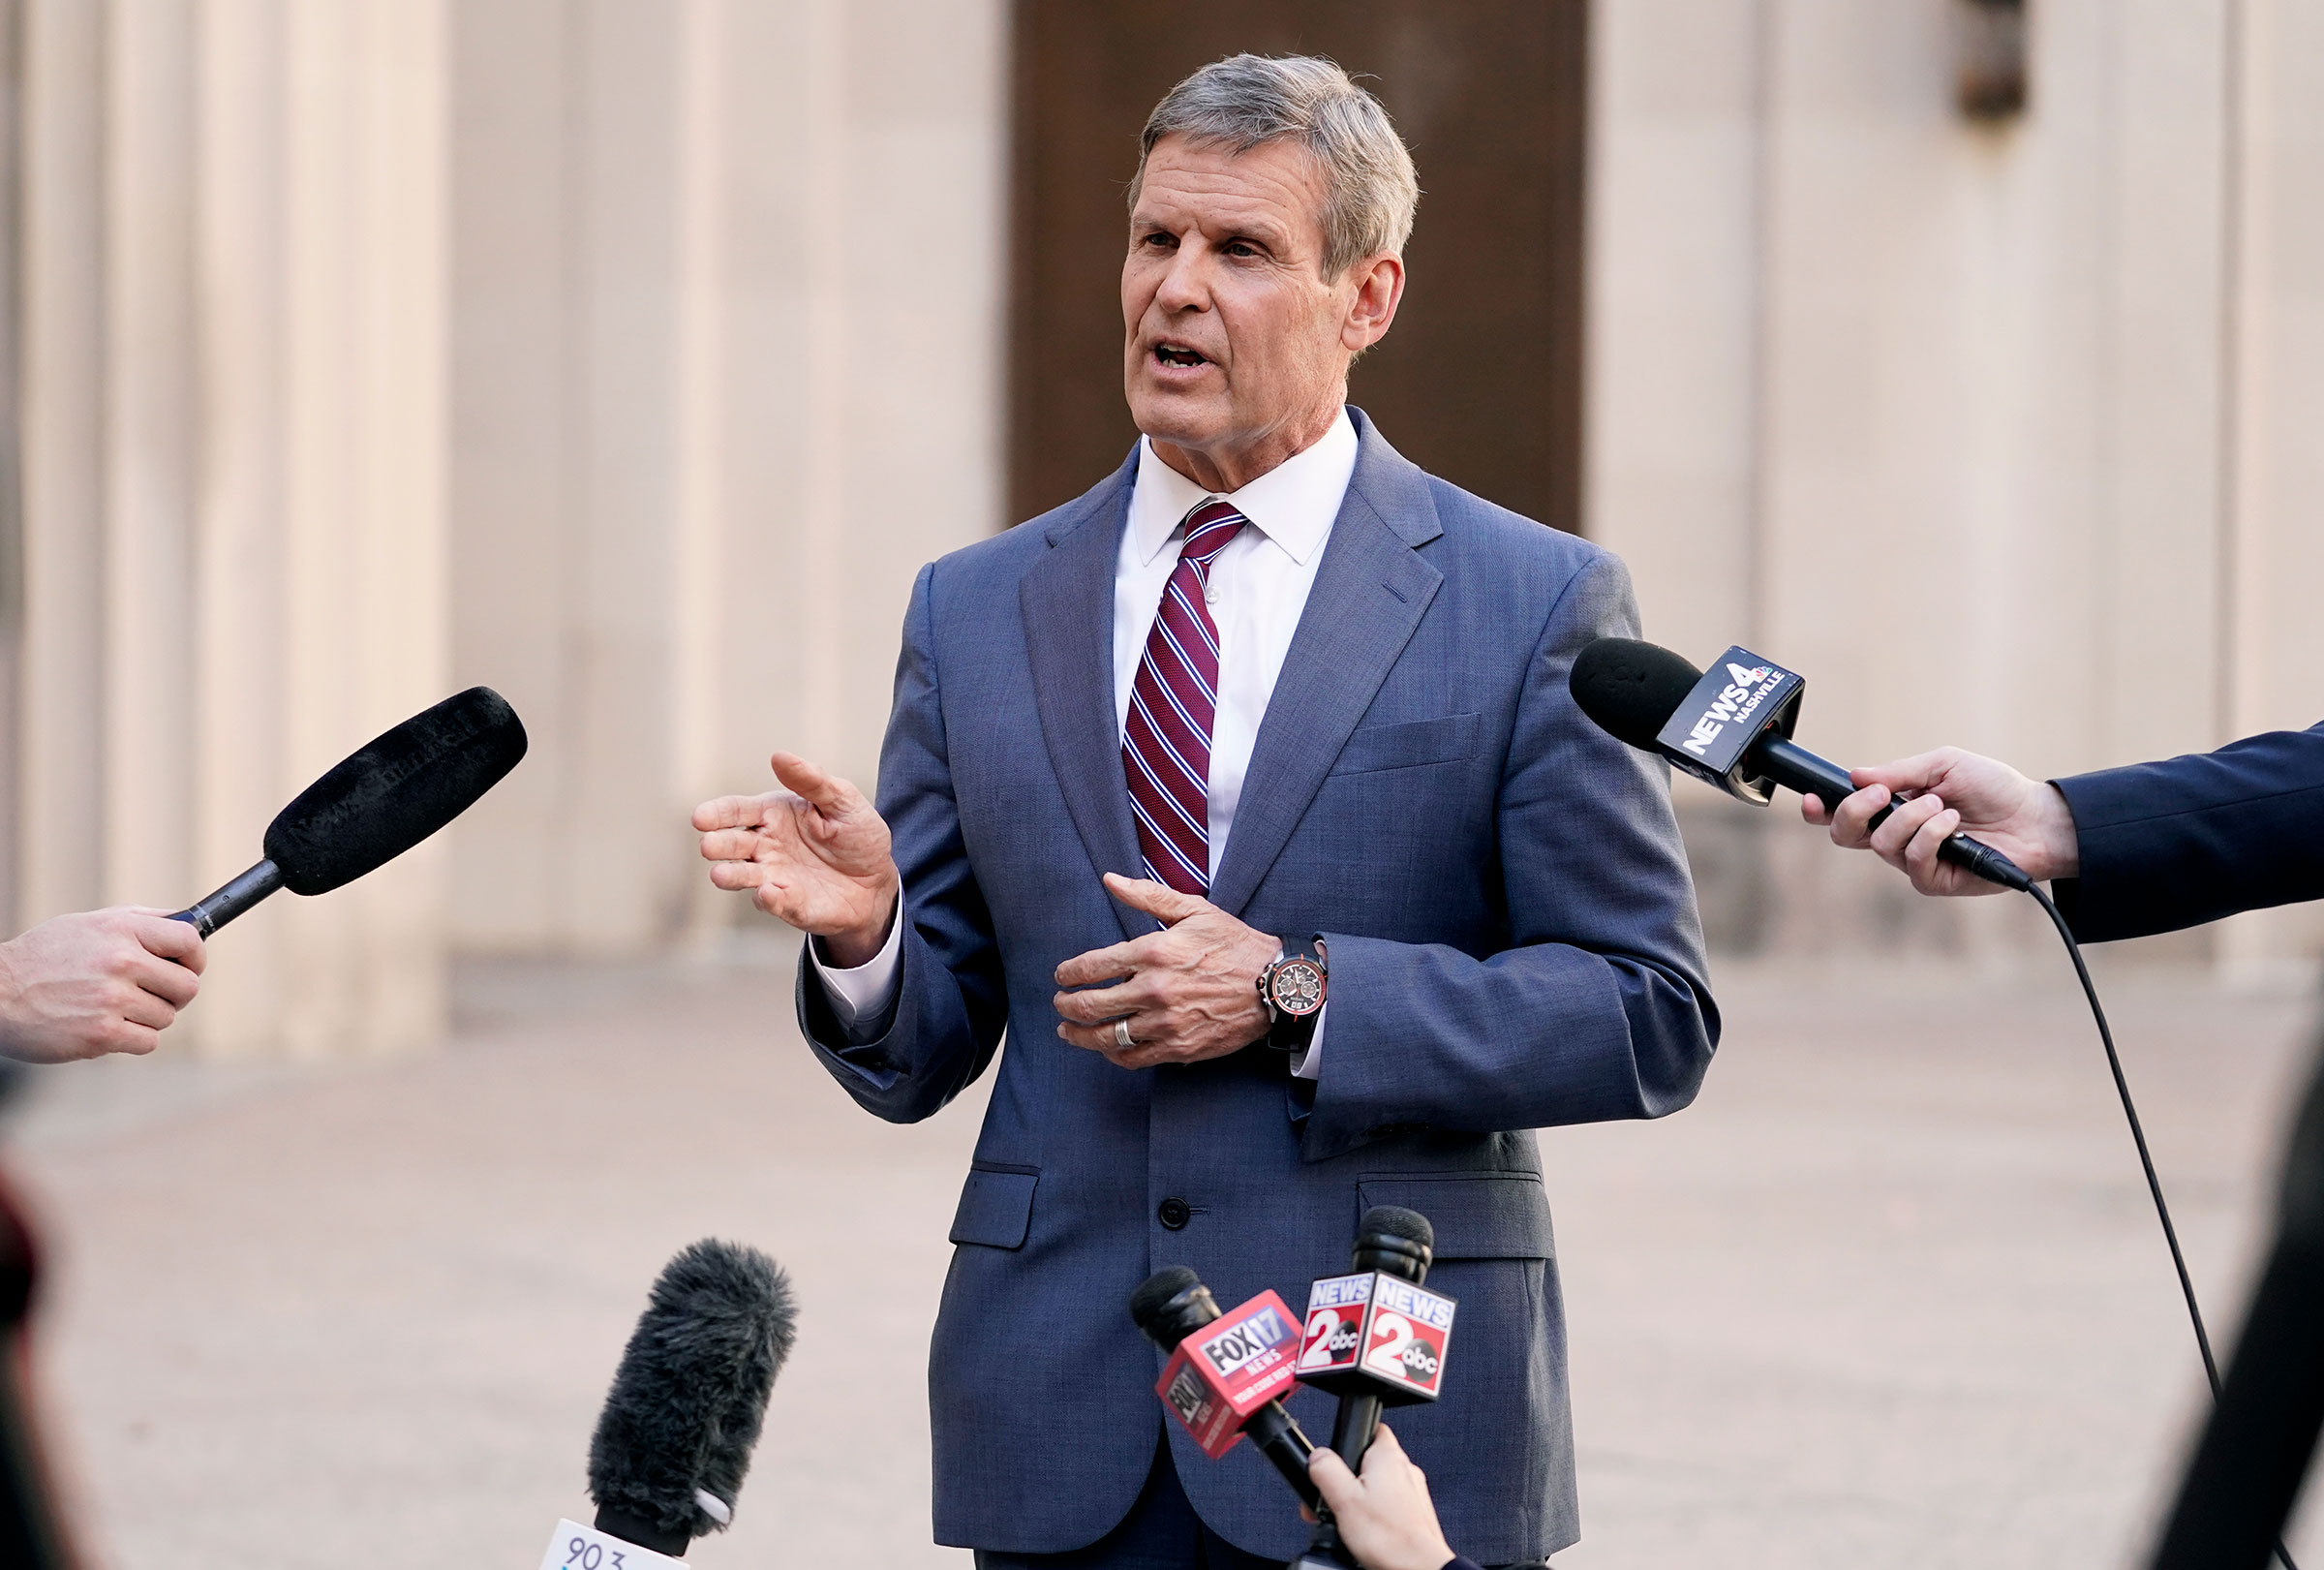 Tennessee Gov. Bill Lee answers questions after he spoke to a joint session of the legislature at the start of a special session on education, in Nashville, Tenn. on Jan. 19, 2021. (Mark Humphrey—AP)